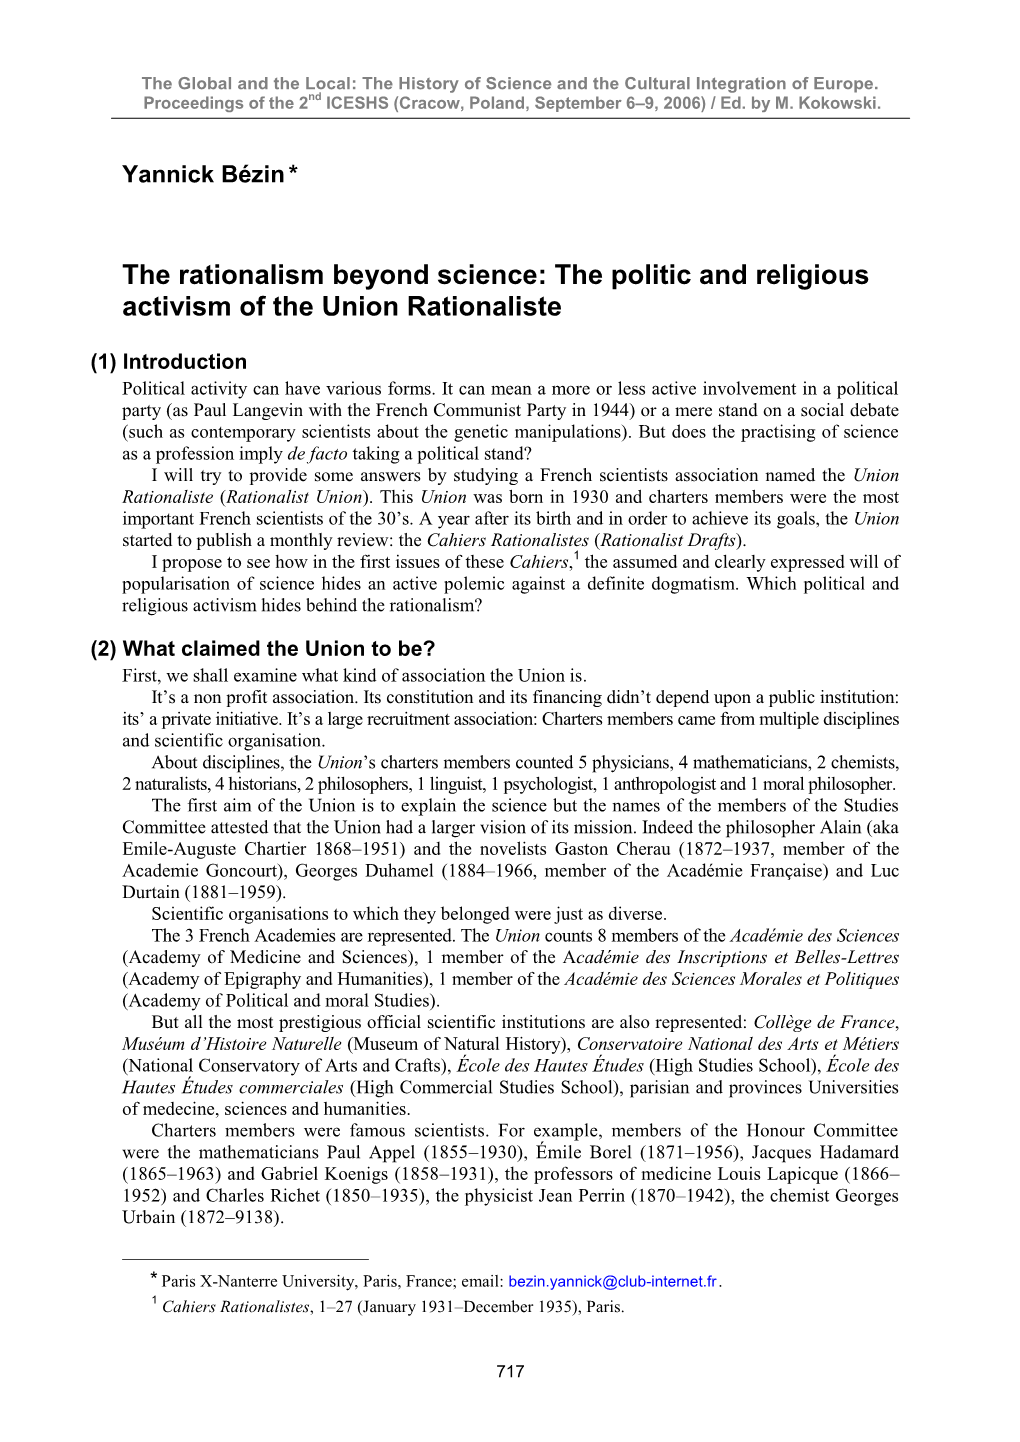 The Politic and Religious Activism of the Union Rationaliste